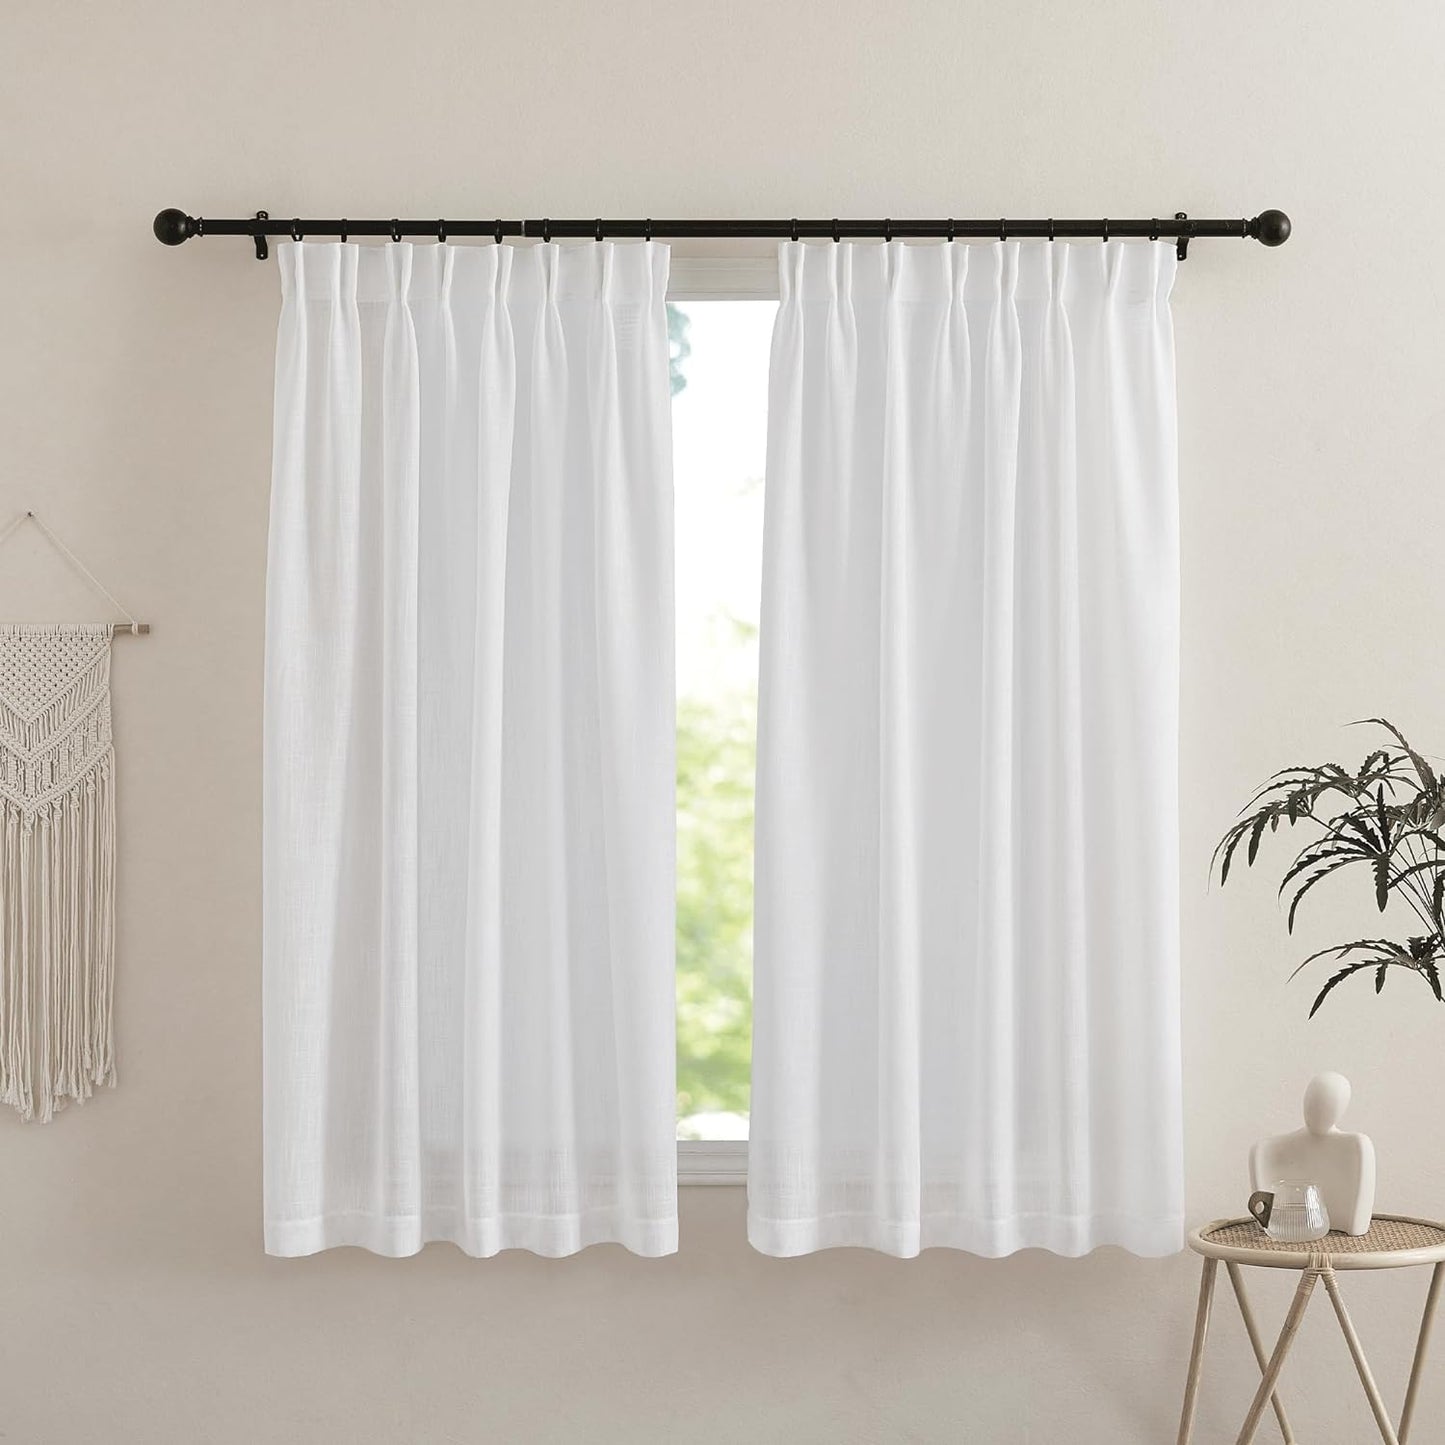 NICETOWN Linen Textured Curtain for Bedroom/Living Room Thermal Insulated Back Tab Linen Look Curtain Drapes Soft Rich Material Light Reducing Drape Panels for Window, 2 Panels, 52 X 84 Inch, Linen  NICETOWN White W52 X L63 